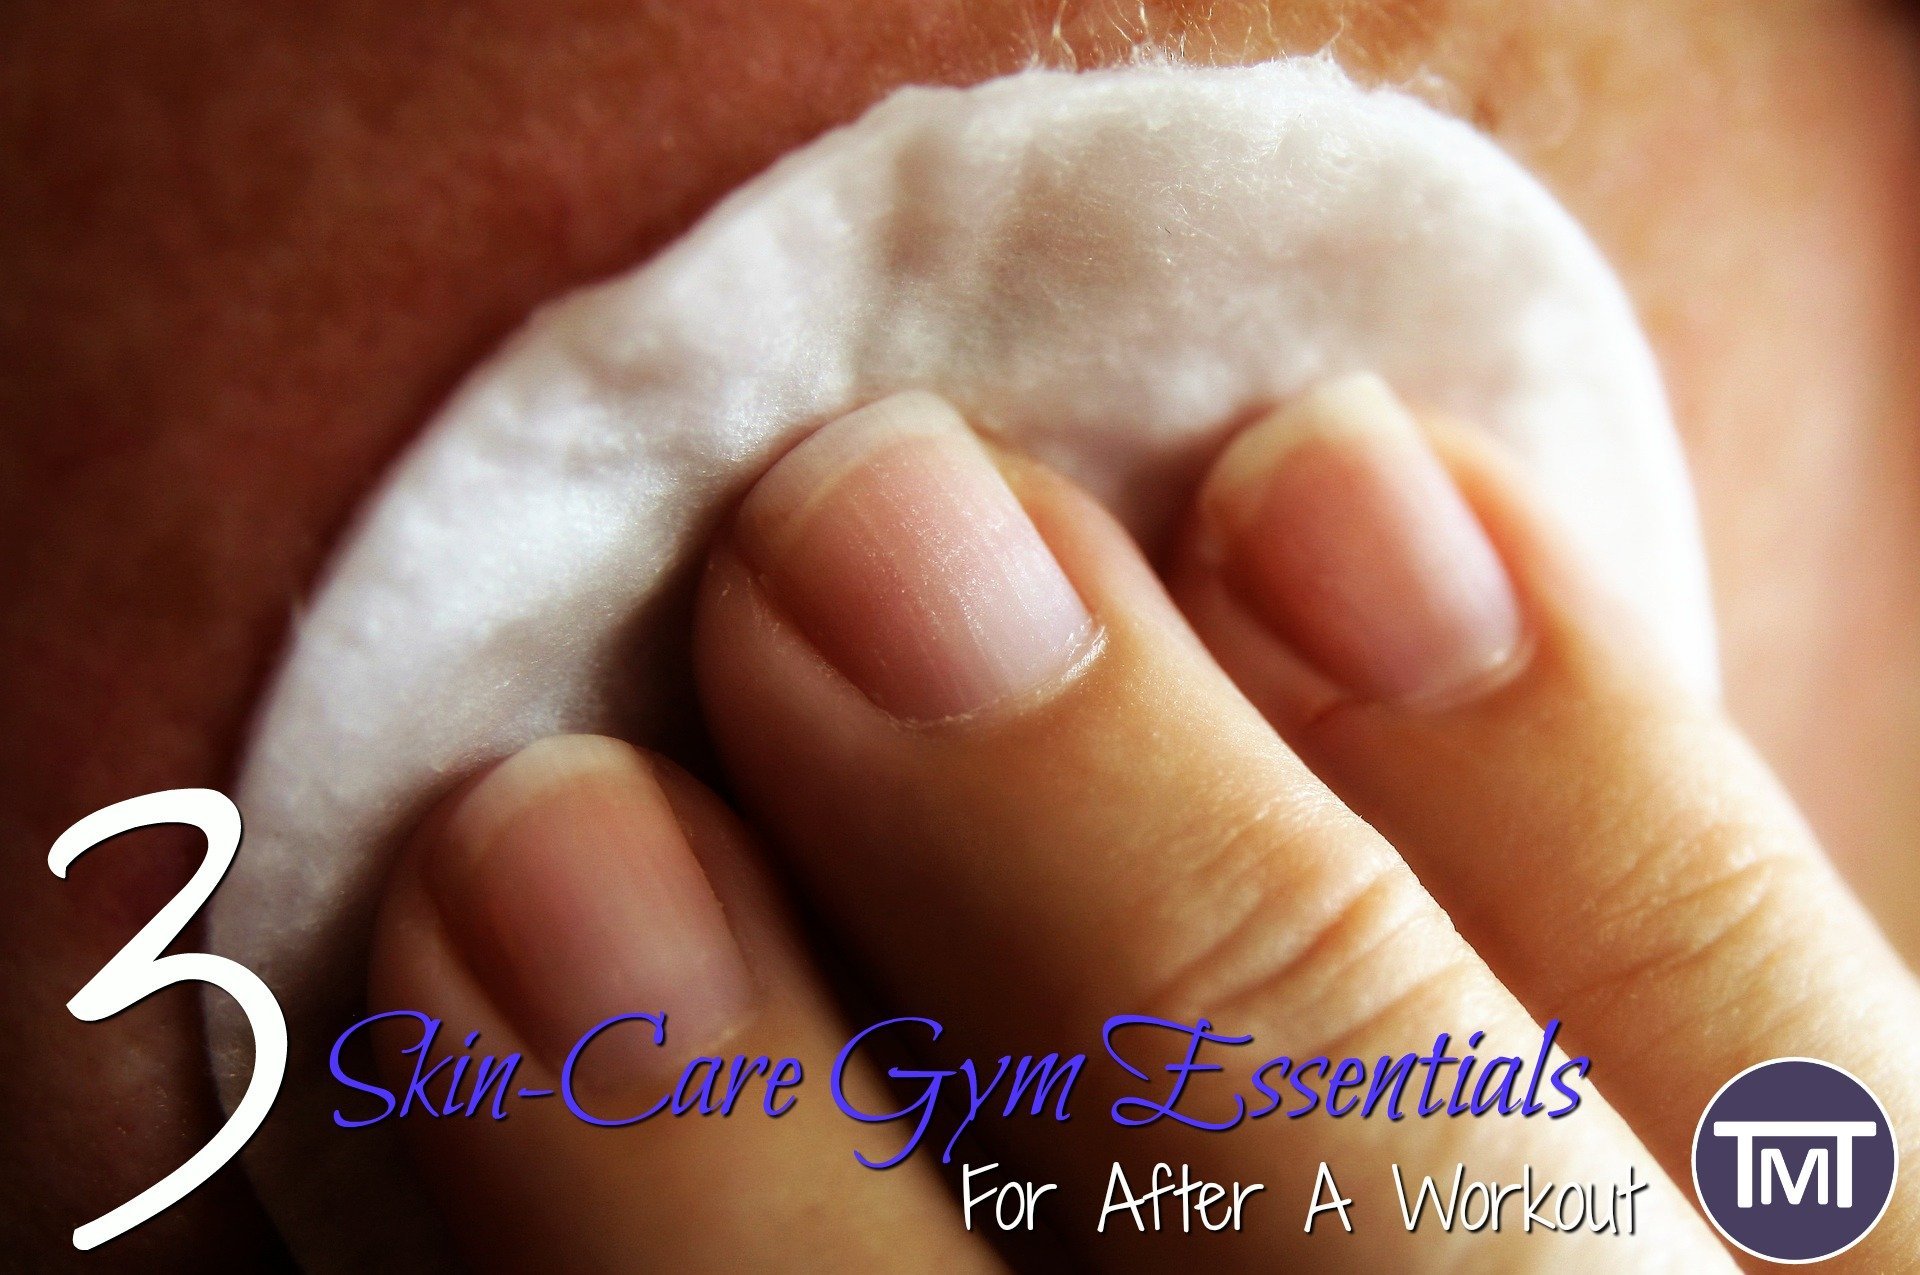 fingers wiping face with cotton wool pad, 3 skincare gym essentials for after a workout